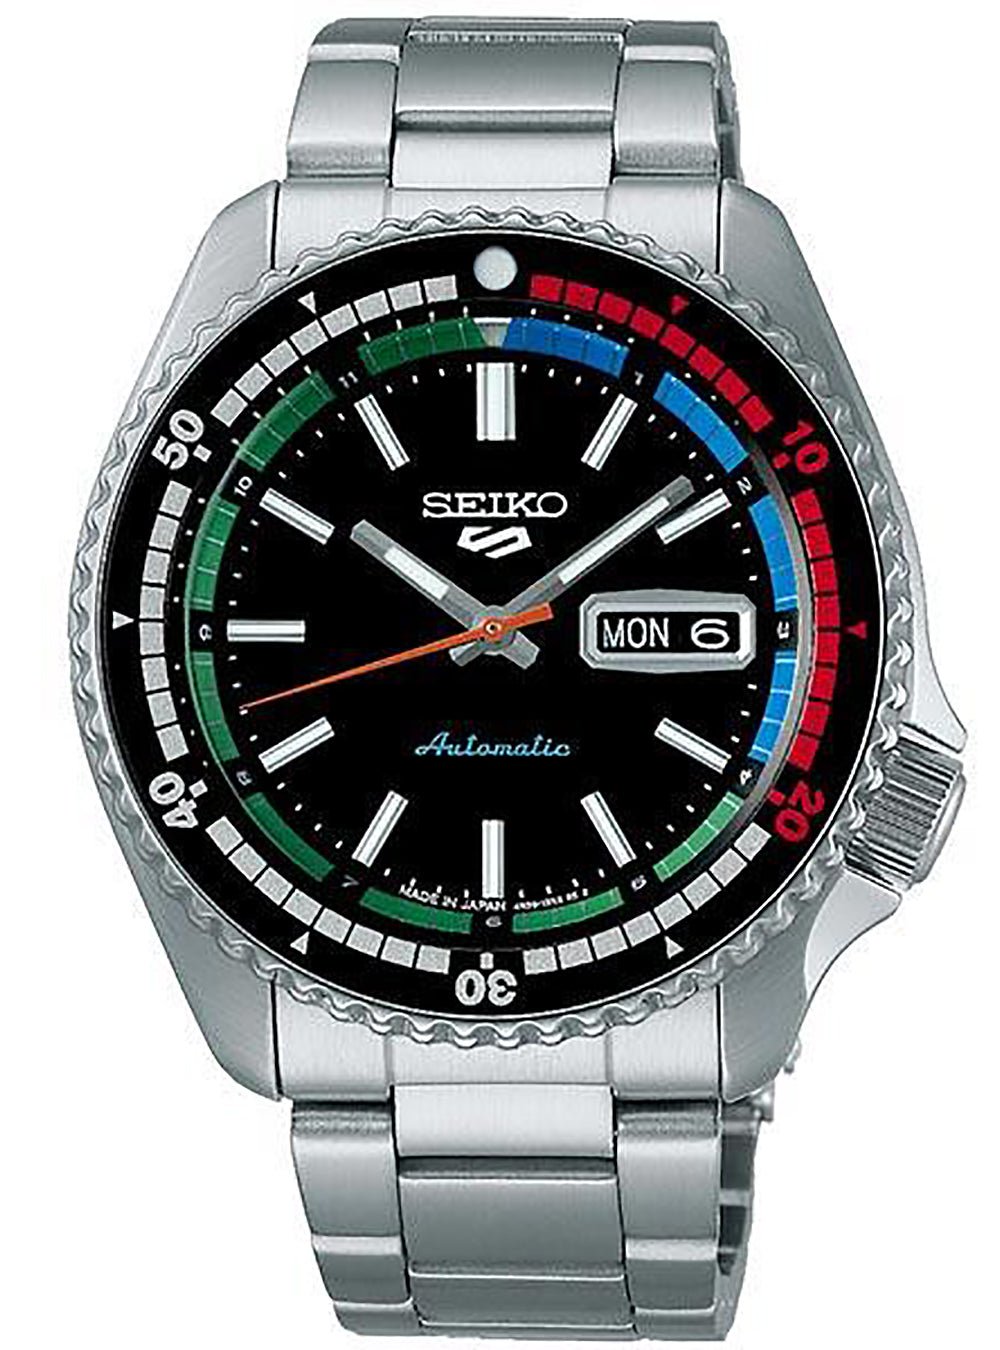 SEIKO 5 SPORTS WATCH SKX SPORTS STYLE SBSA221 SPECIAL EDITION MADE IN JAPAN JDM